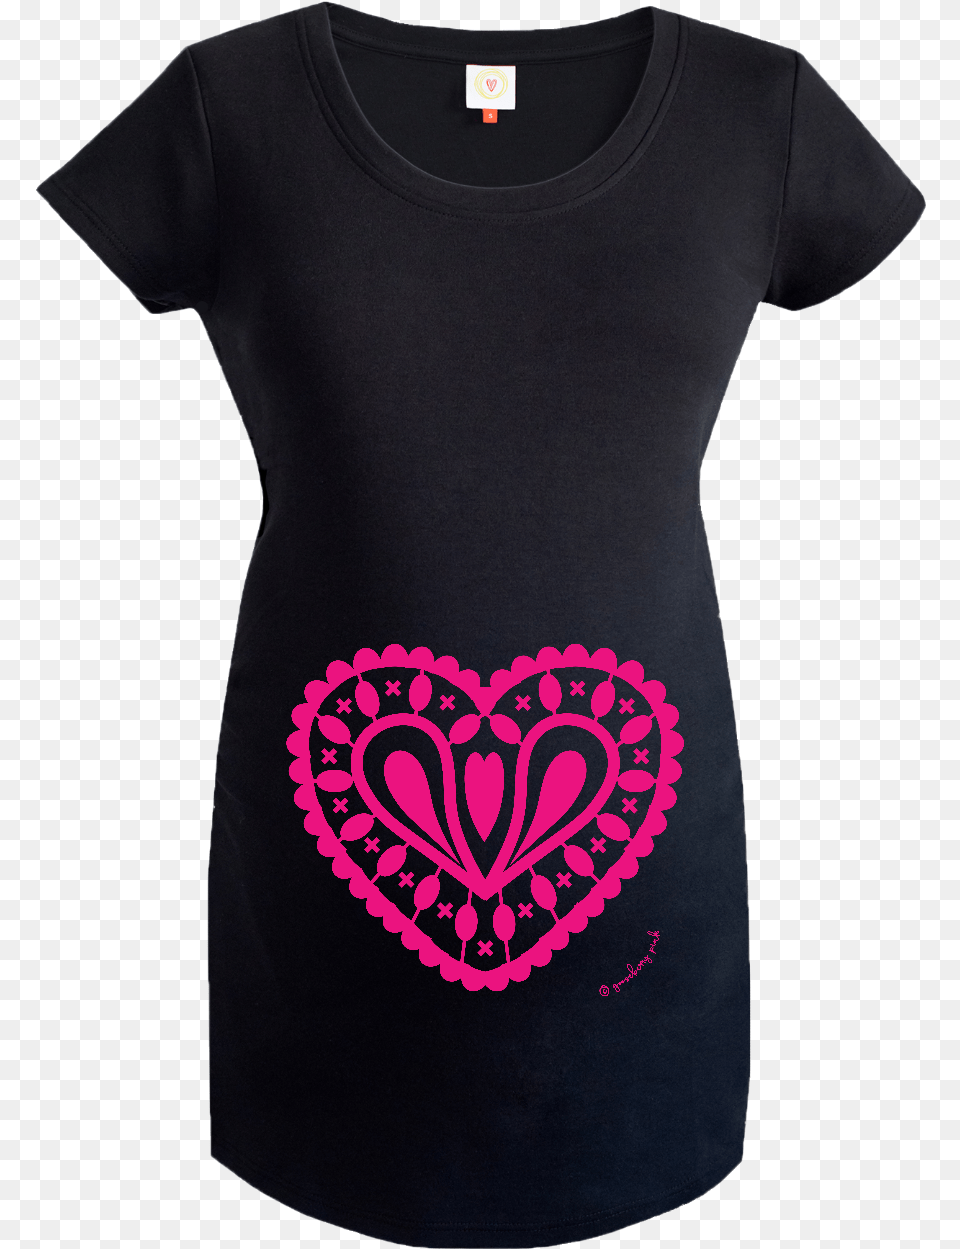 Gooseberry Pink Hot Pink Heart Maternity Top In Black Active Shirt, Clothing, T-shirt, Pattern Png